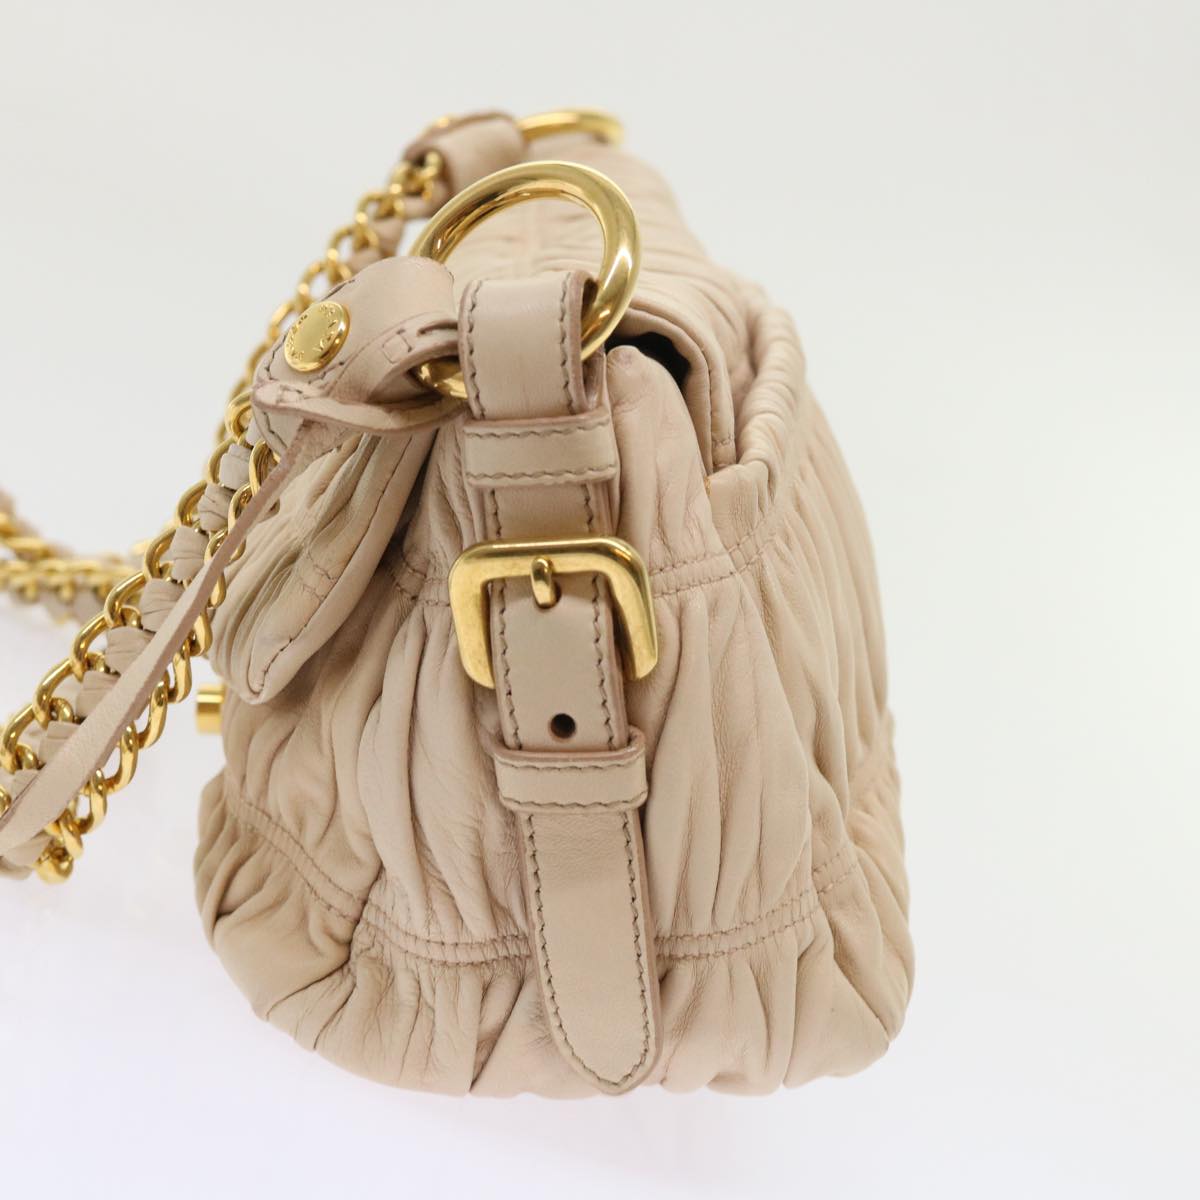 PRADA Chain Shoulder Bag Leather Pink Auth bs6657